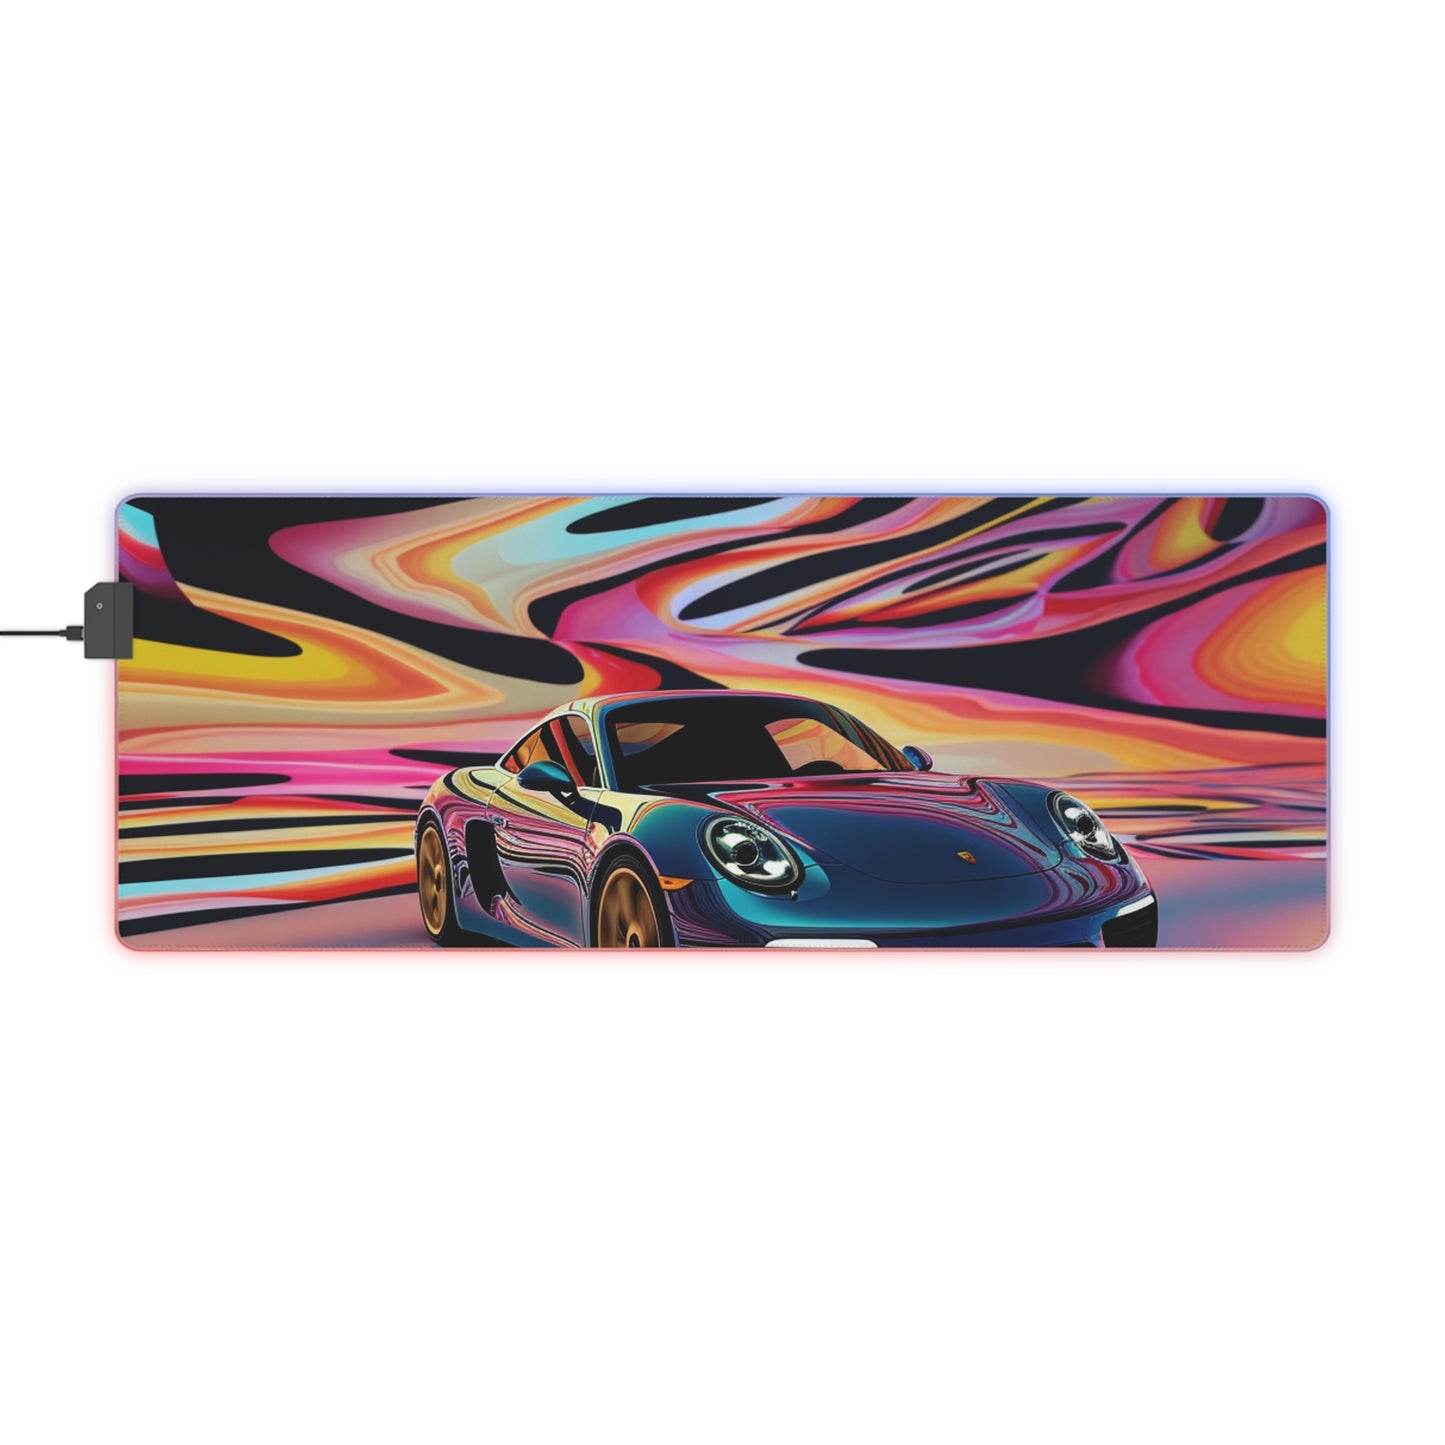 LED Gaming Mouse Pad Porsche Water Fusion 2